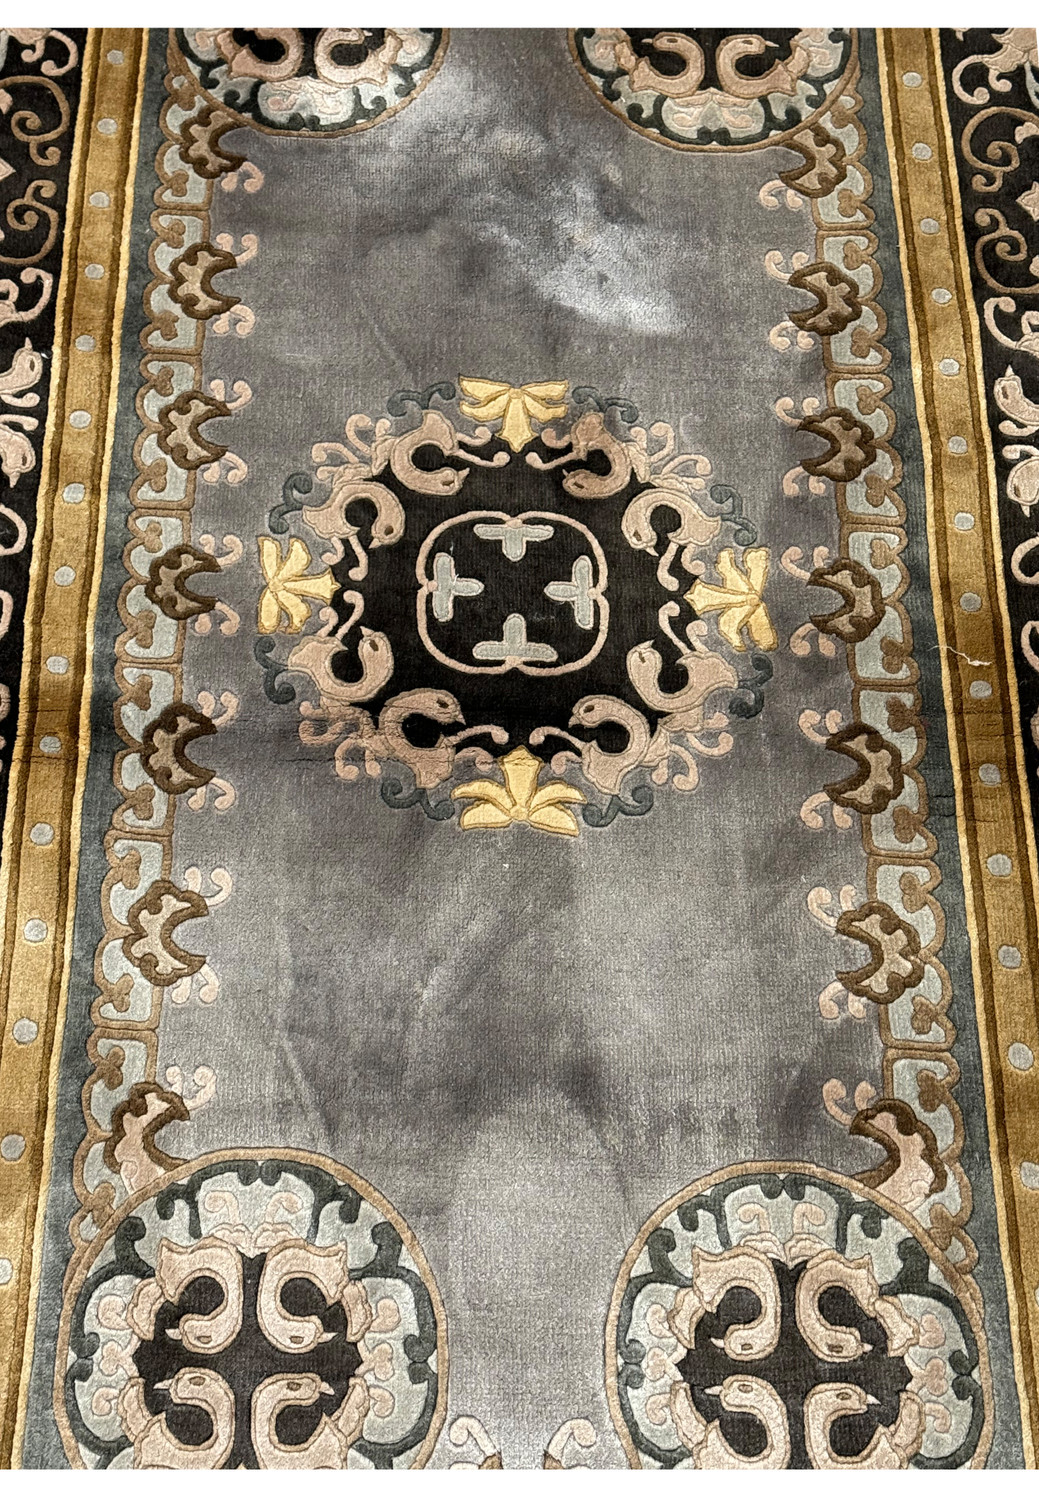 Close-up of the central medallion on Art Deco rug showing the detailed silk accents and plush wool texture